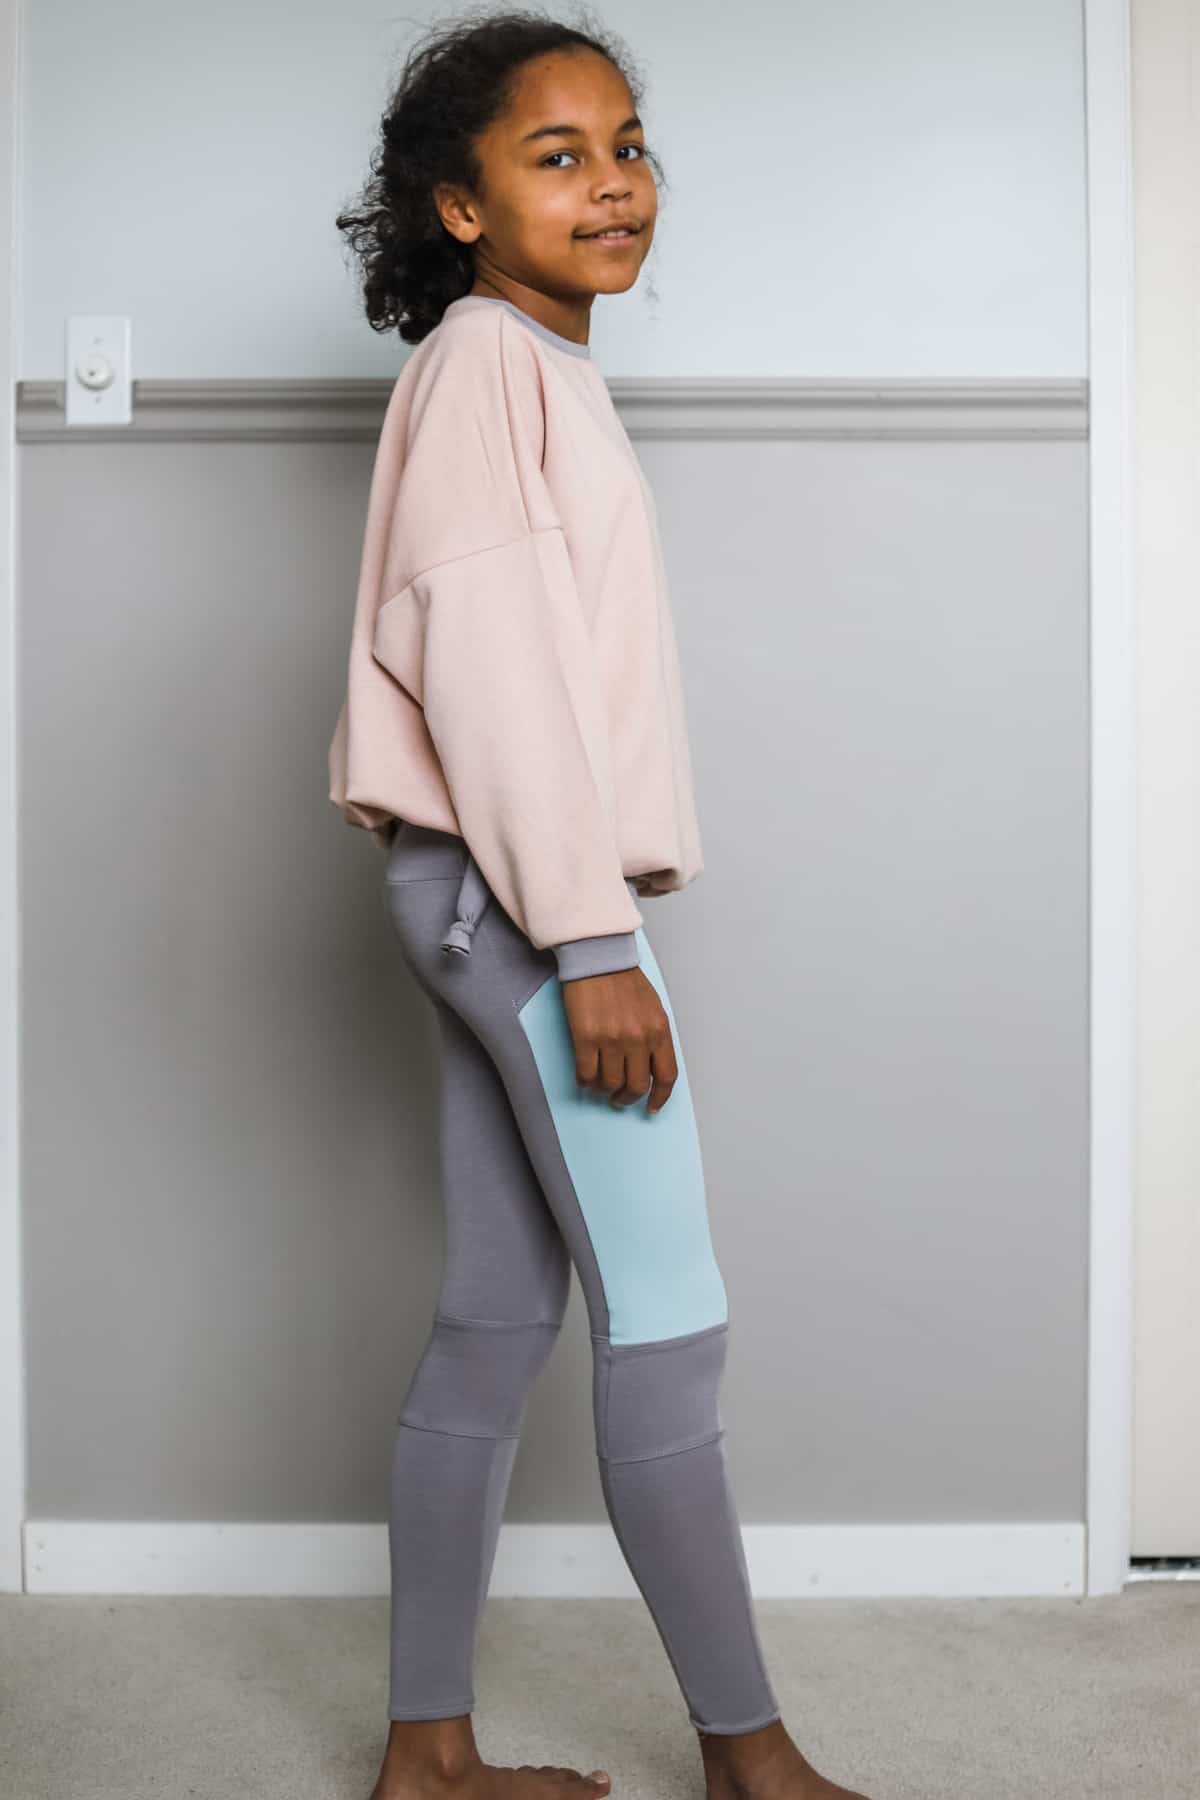 Leggings for PRE TEENS - Tahnee and the Treehouse